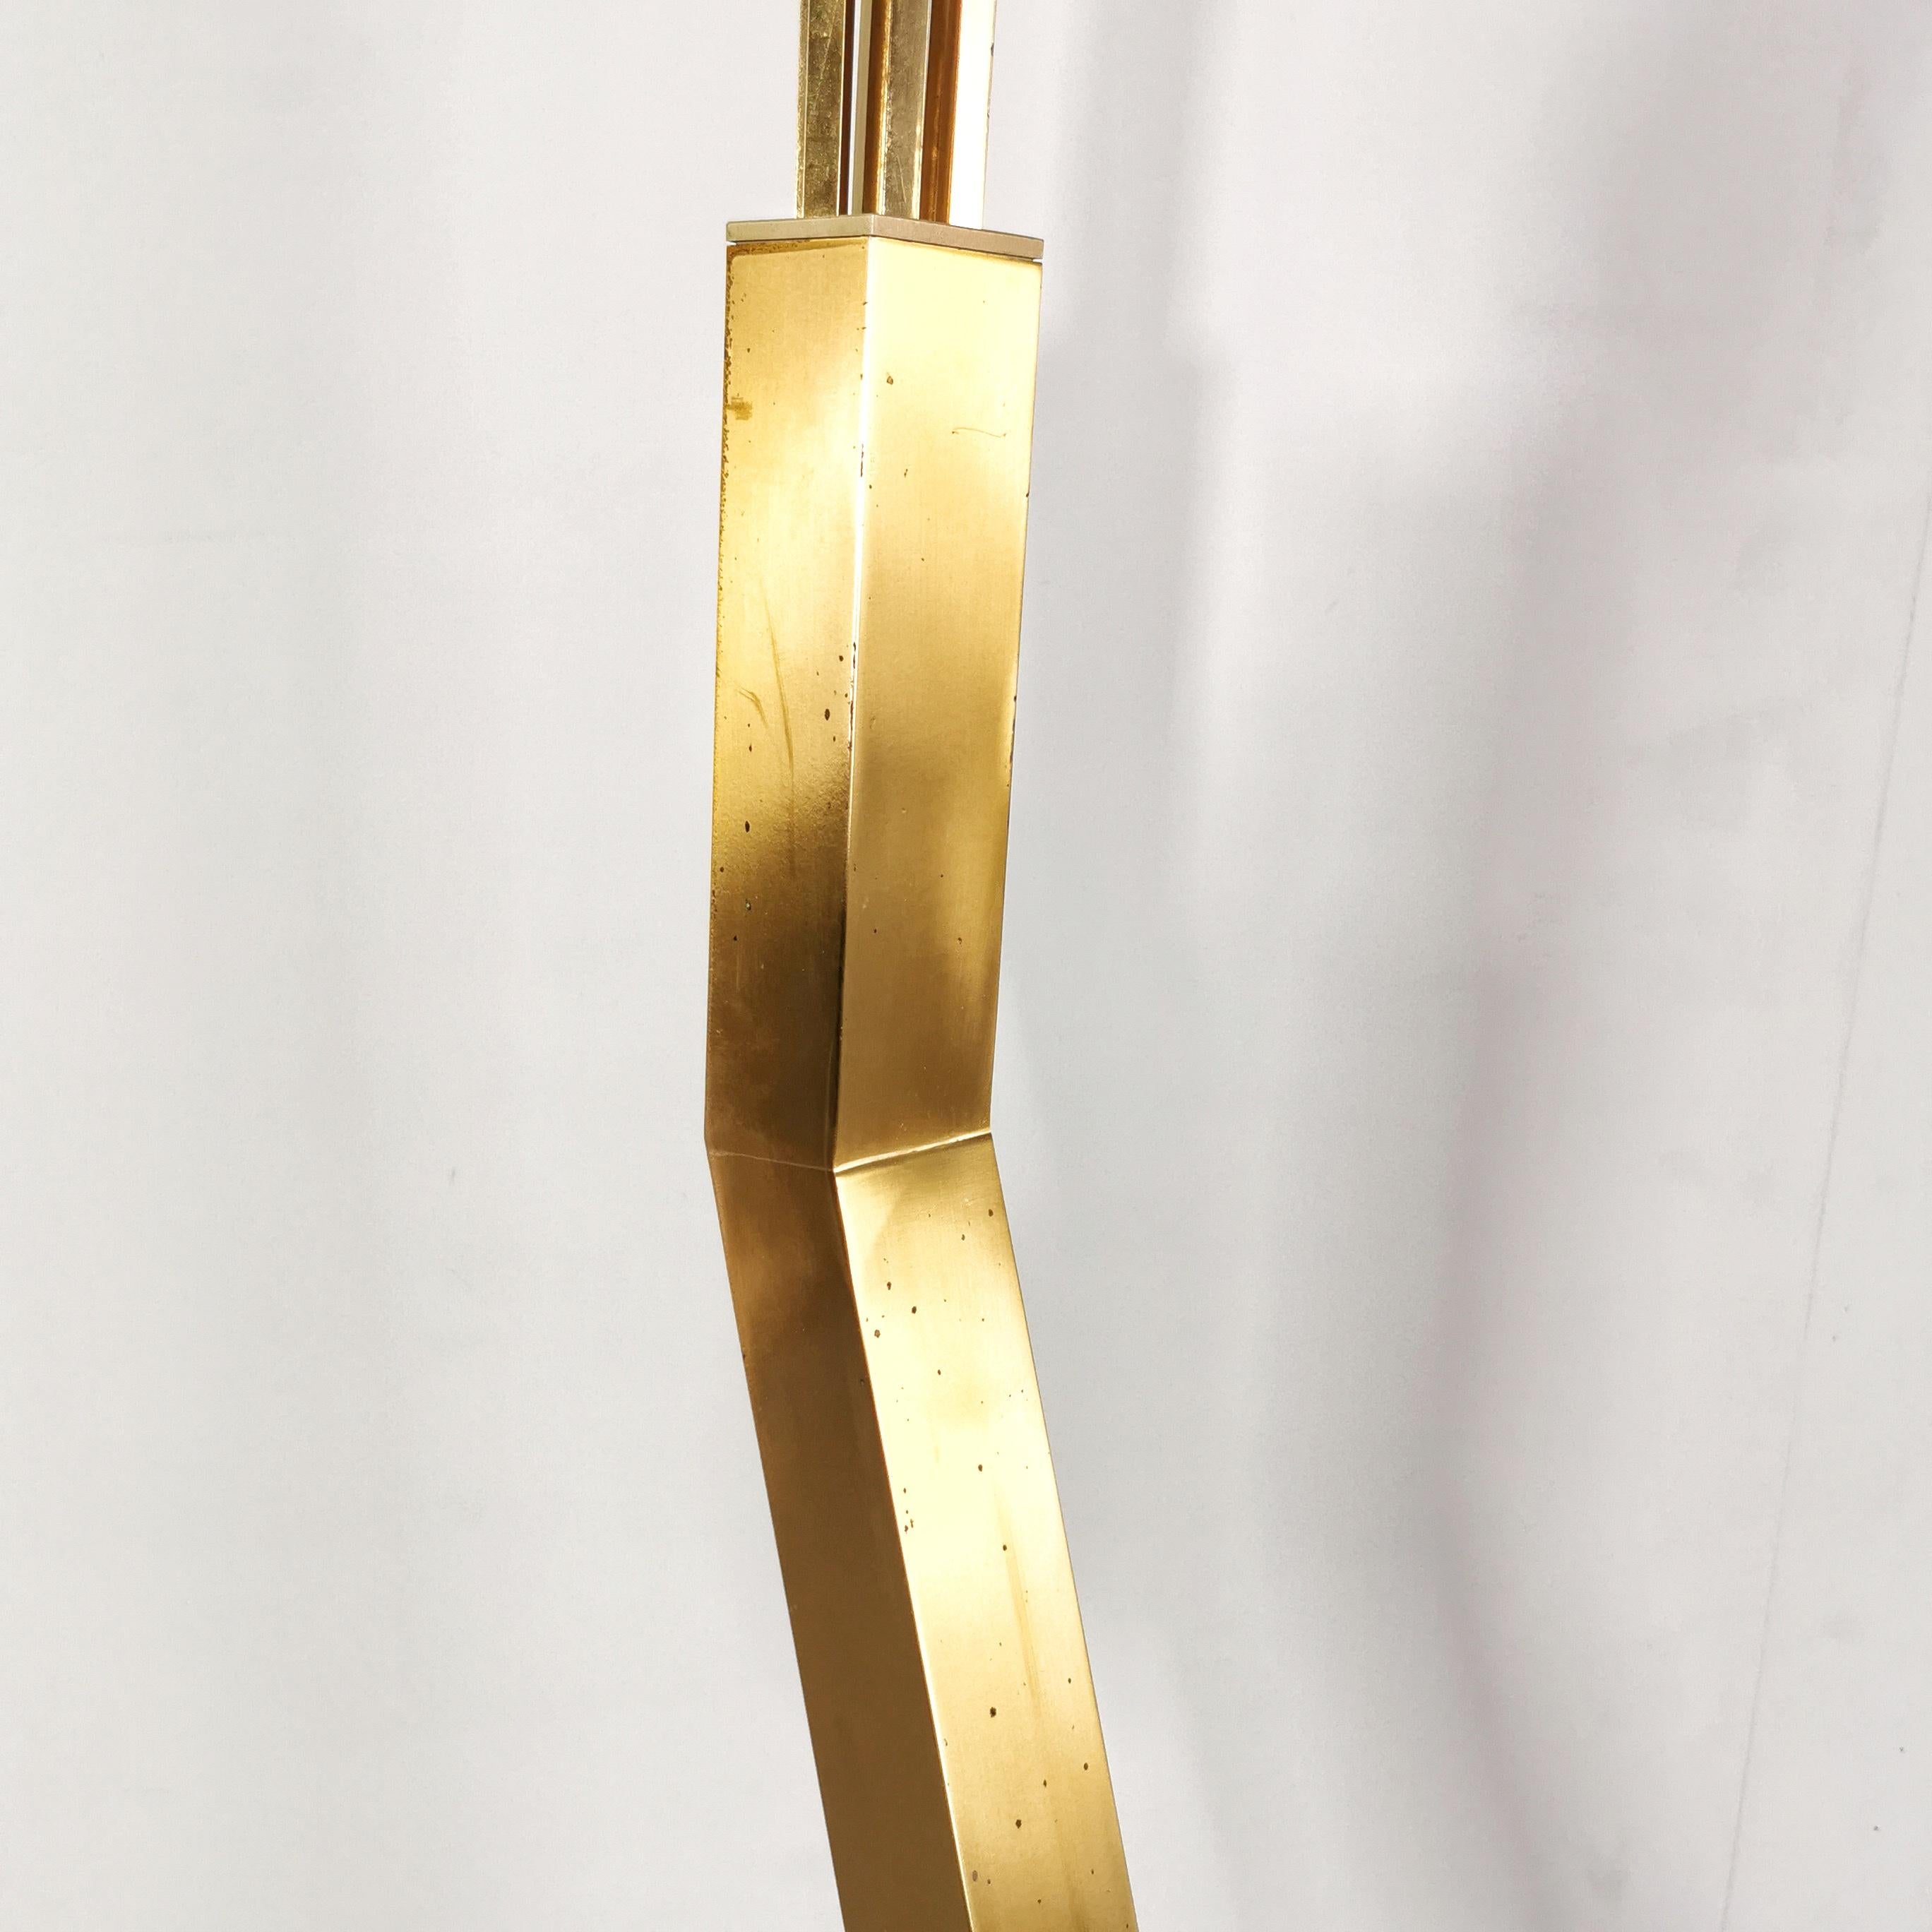 Large 1960s brass floor lamp 7 Arms For Sale 2